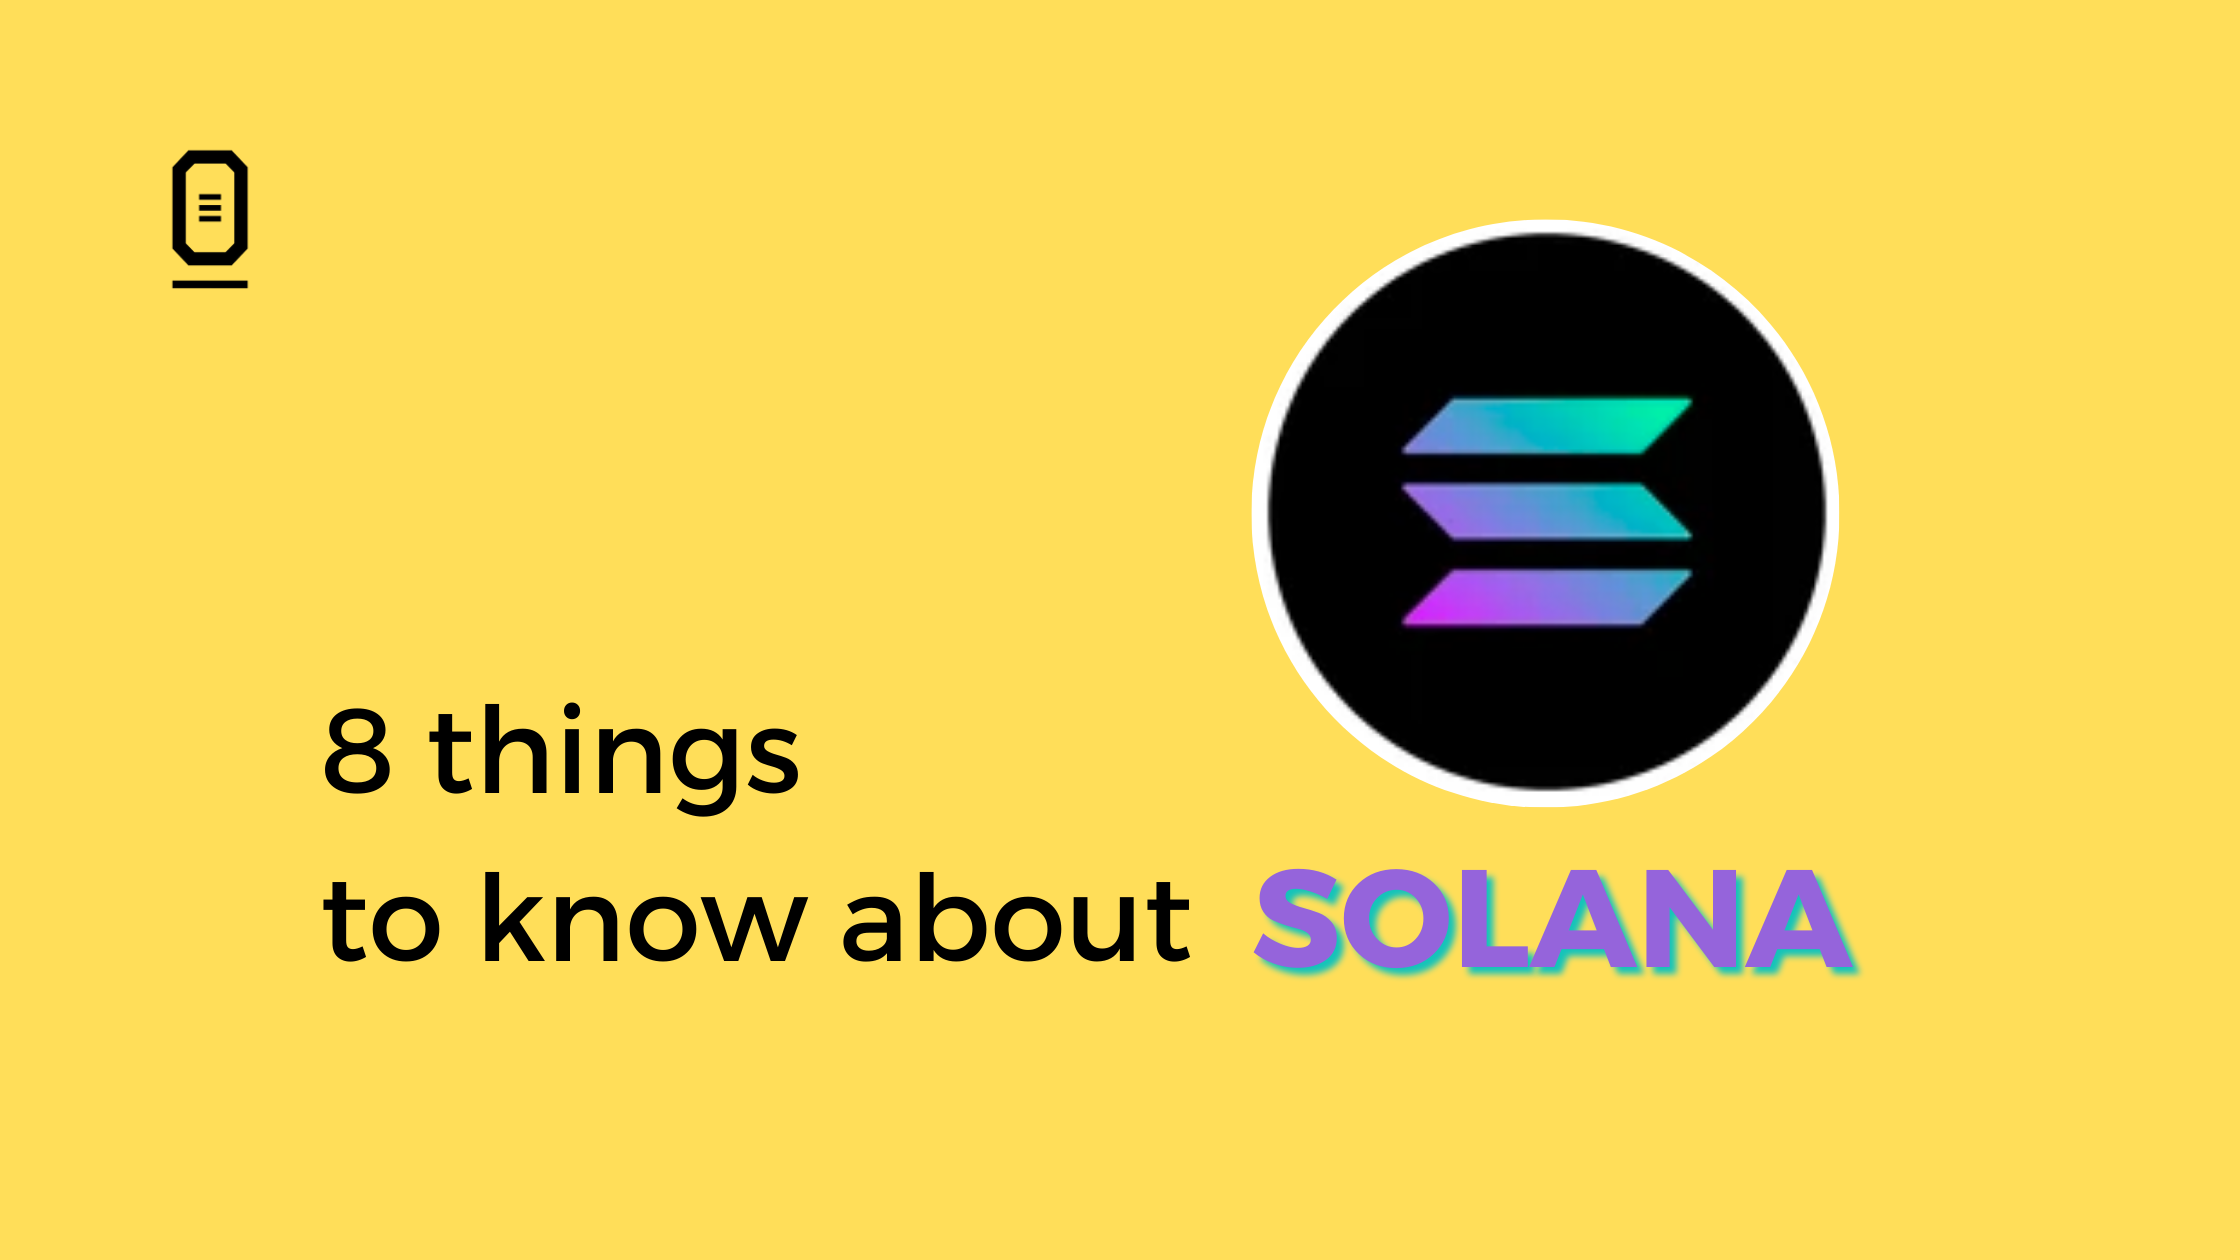 8 Things to know about Solana